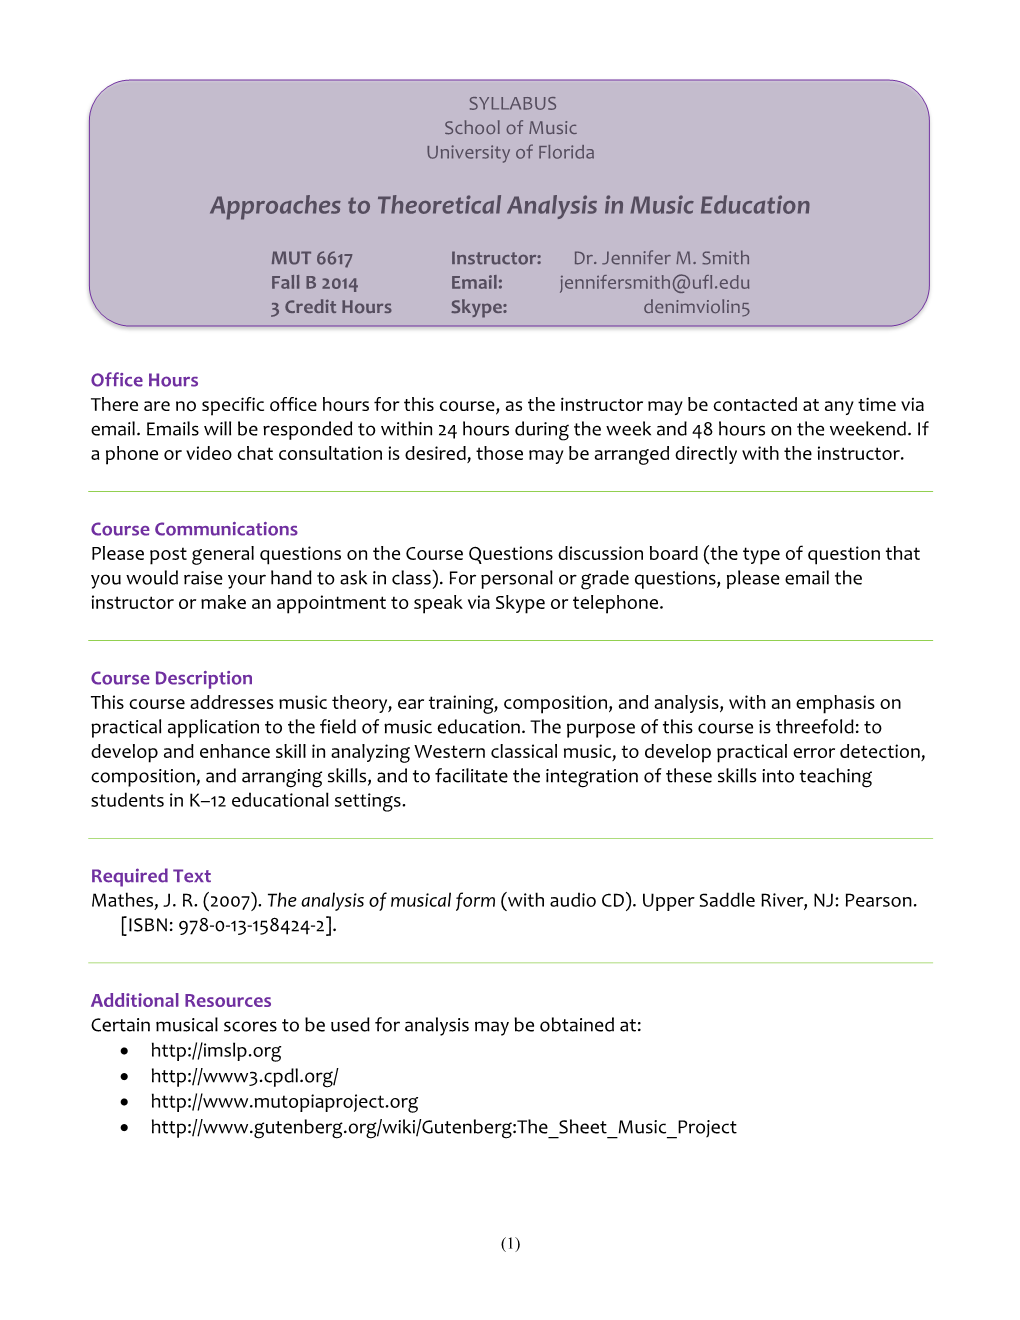 Approaches to Theoretical Analysis in Music Education